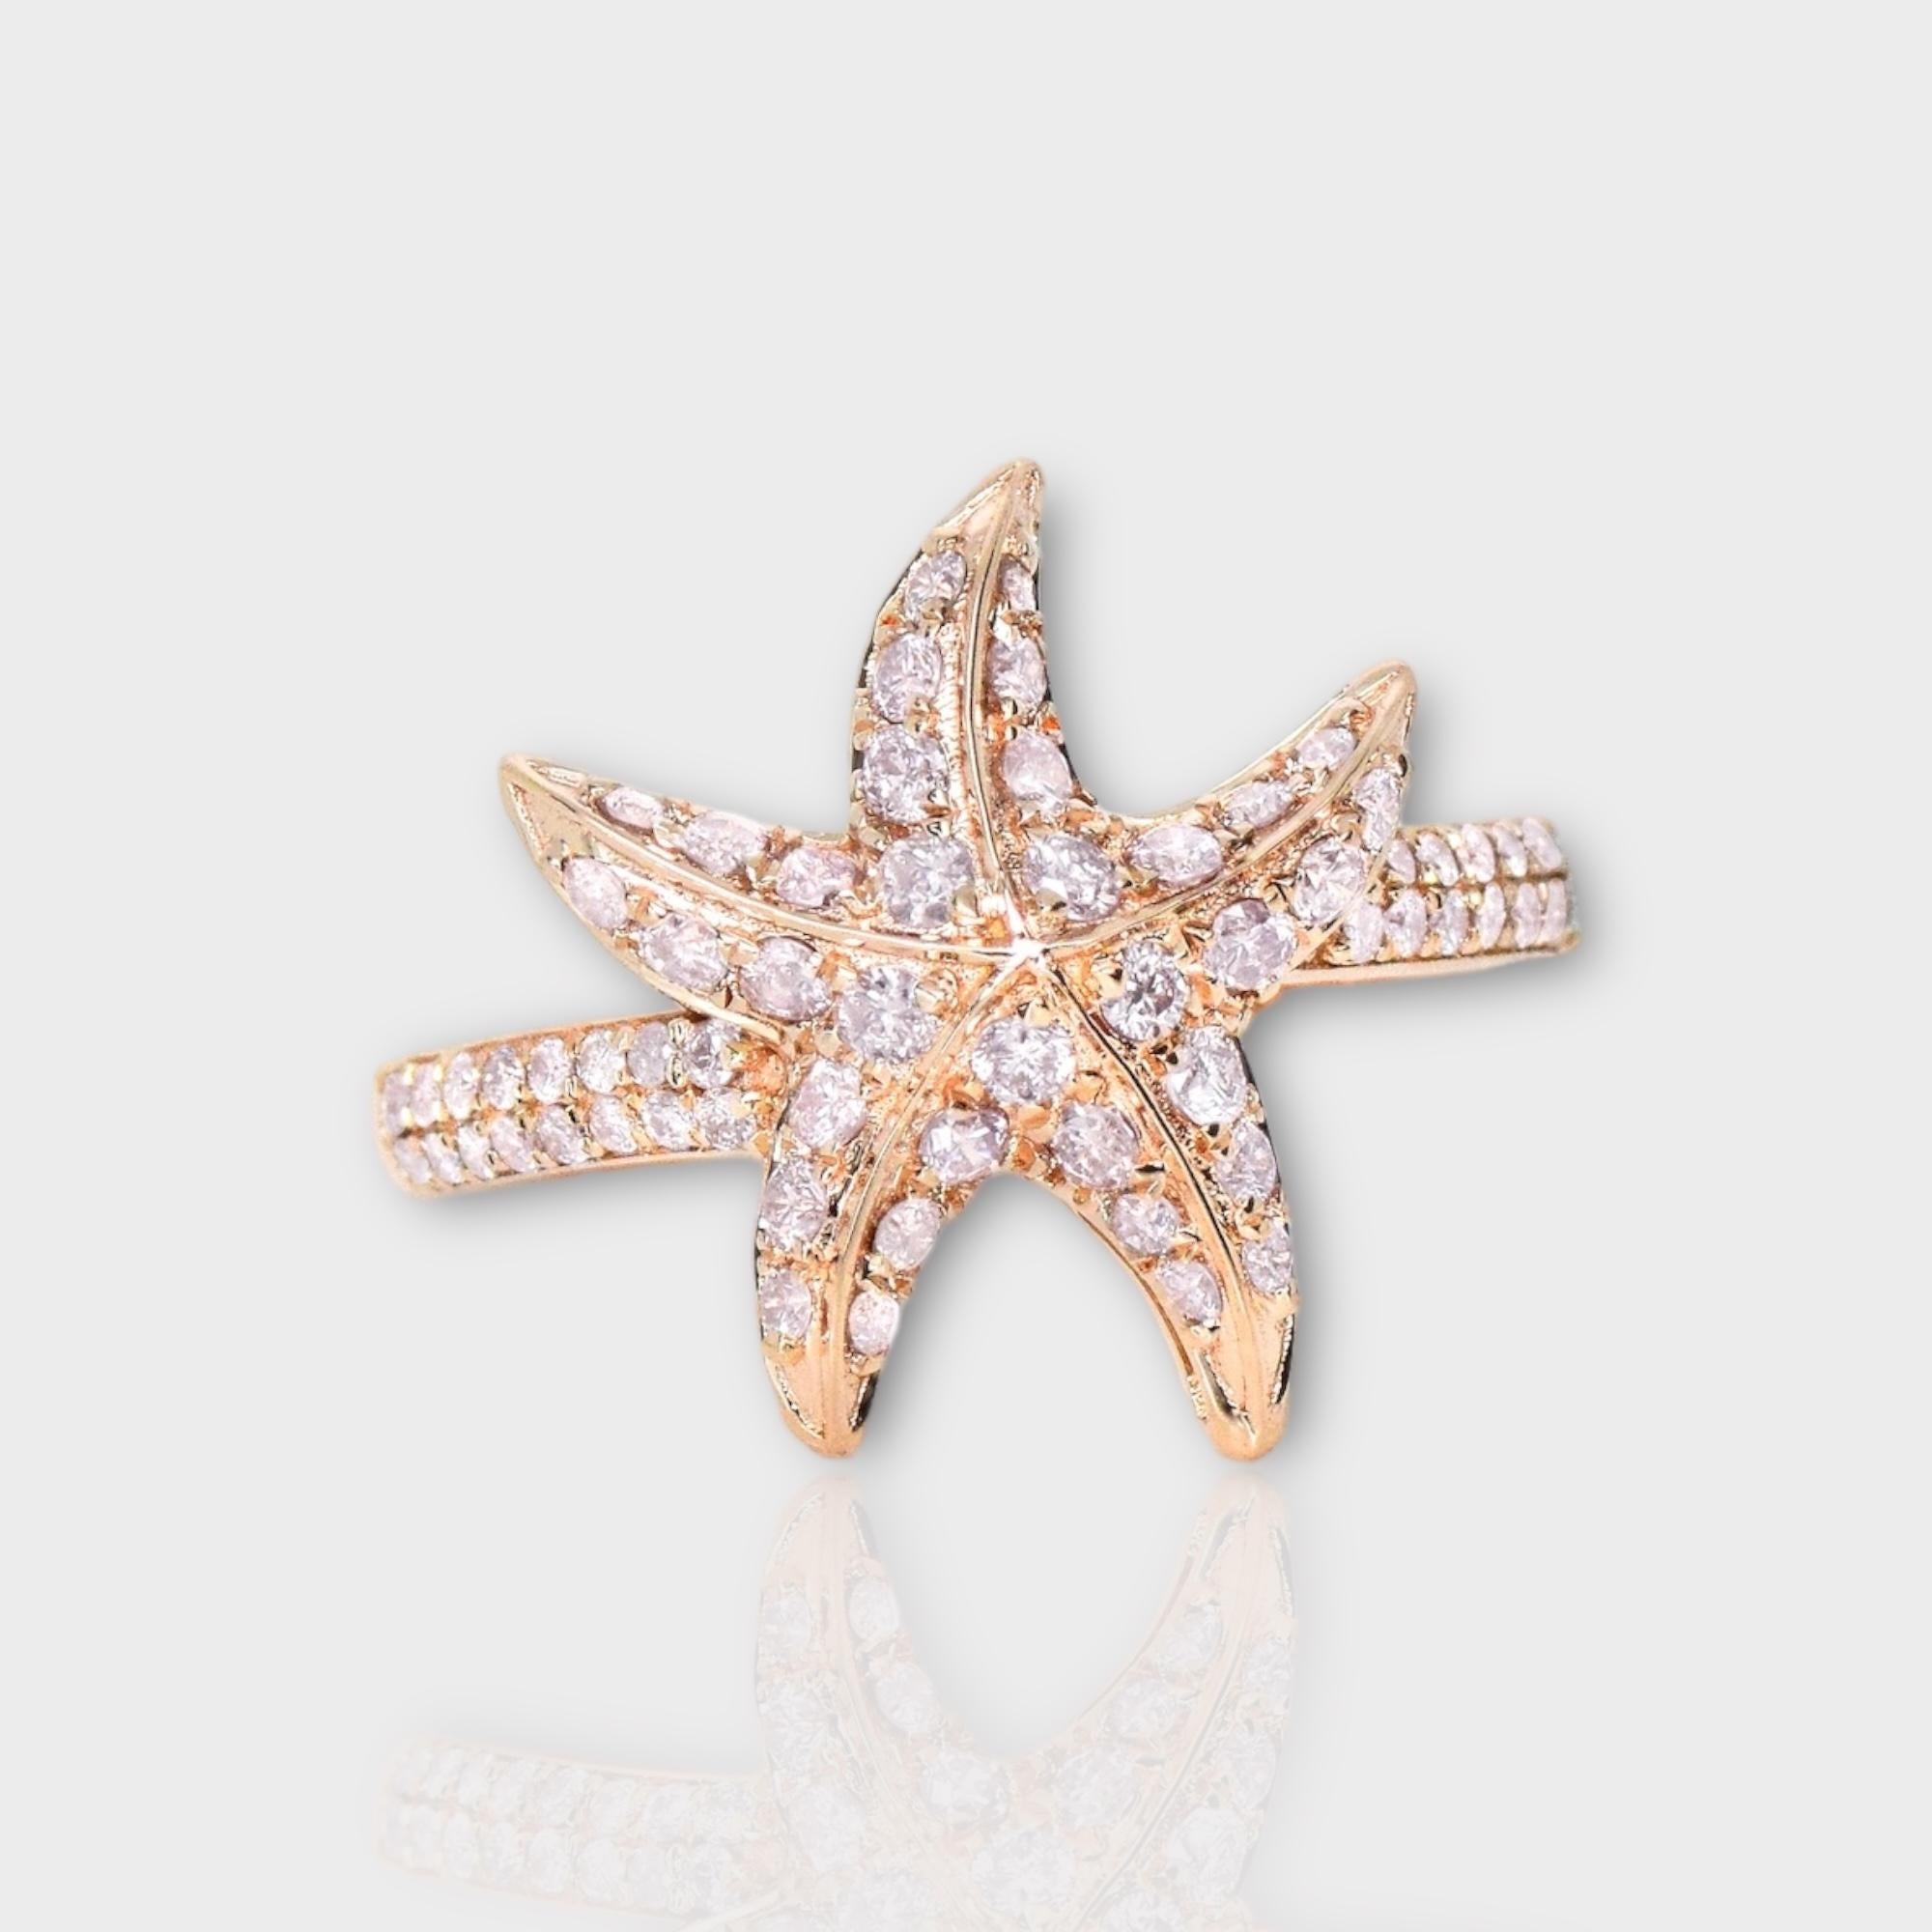 *IGI 14K 0.60 ct Natural Pink Diamonds Sea Star Design  Antique Art Deco Ring*

This band features a stunning design with a sea star crafted from 14K rose gold. It is set with natural pink diamonds weighing 0.60 carats.

This ring features colorful